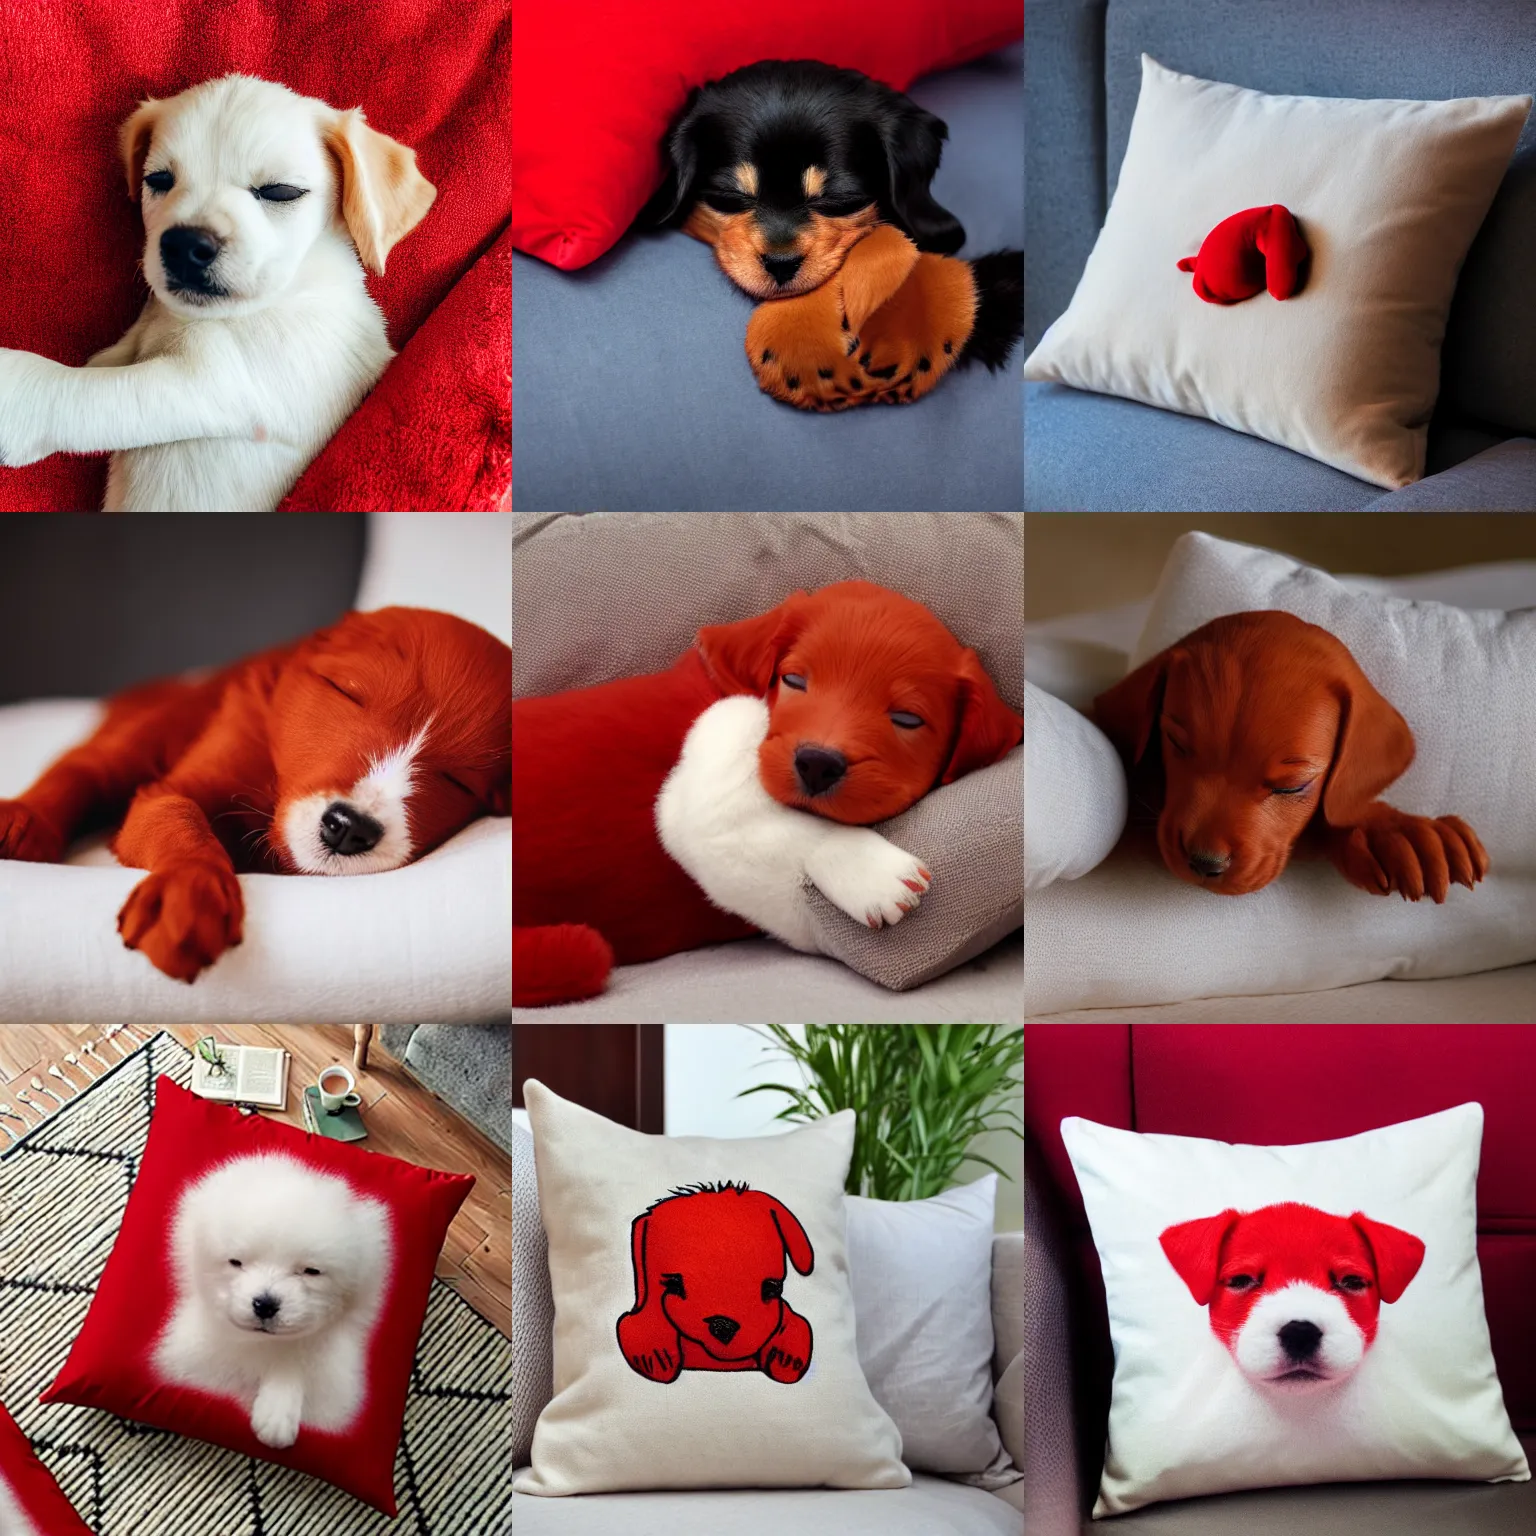 Prompt: an adorable red puppy sleeping on a pillow